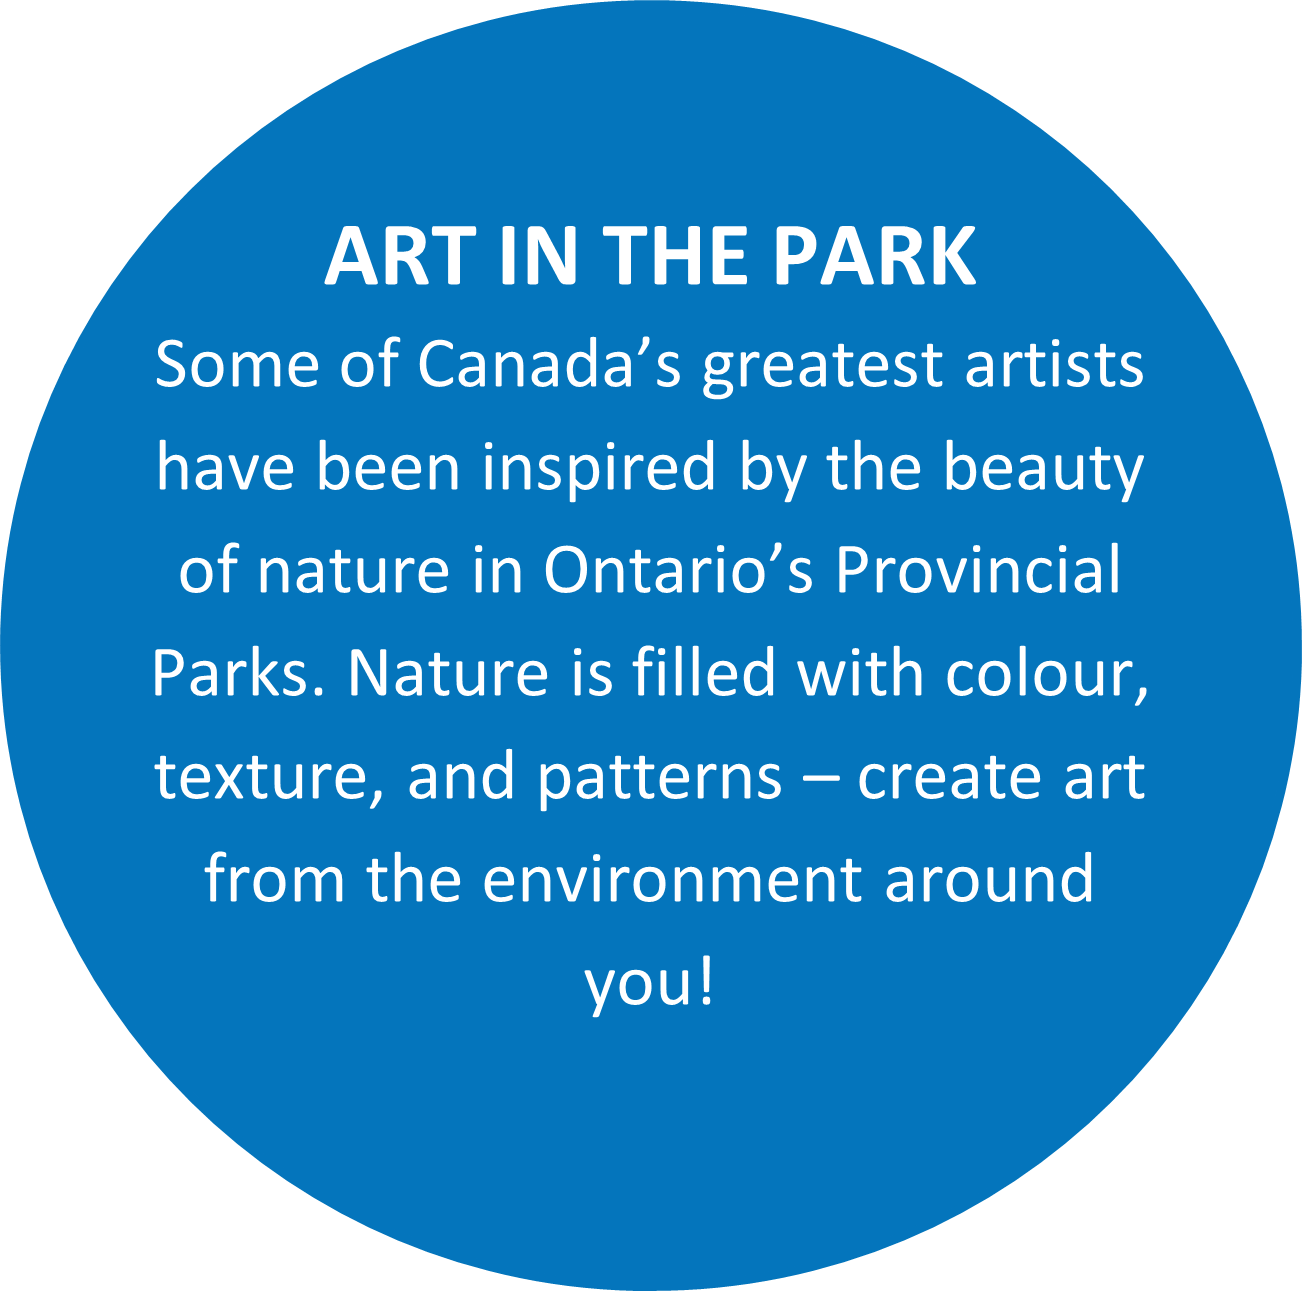 Text: ART IN THE PARK Some of Canada’s greatest artists have been inspired by the beauty of nature in Ontario’s Provincial Parks. Nature is filled with colour, texture, and patterns – create art from the environment around you!